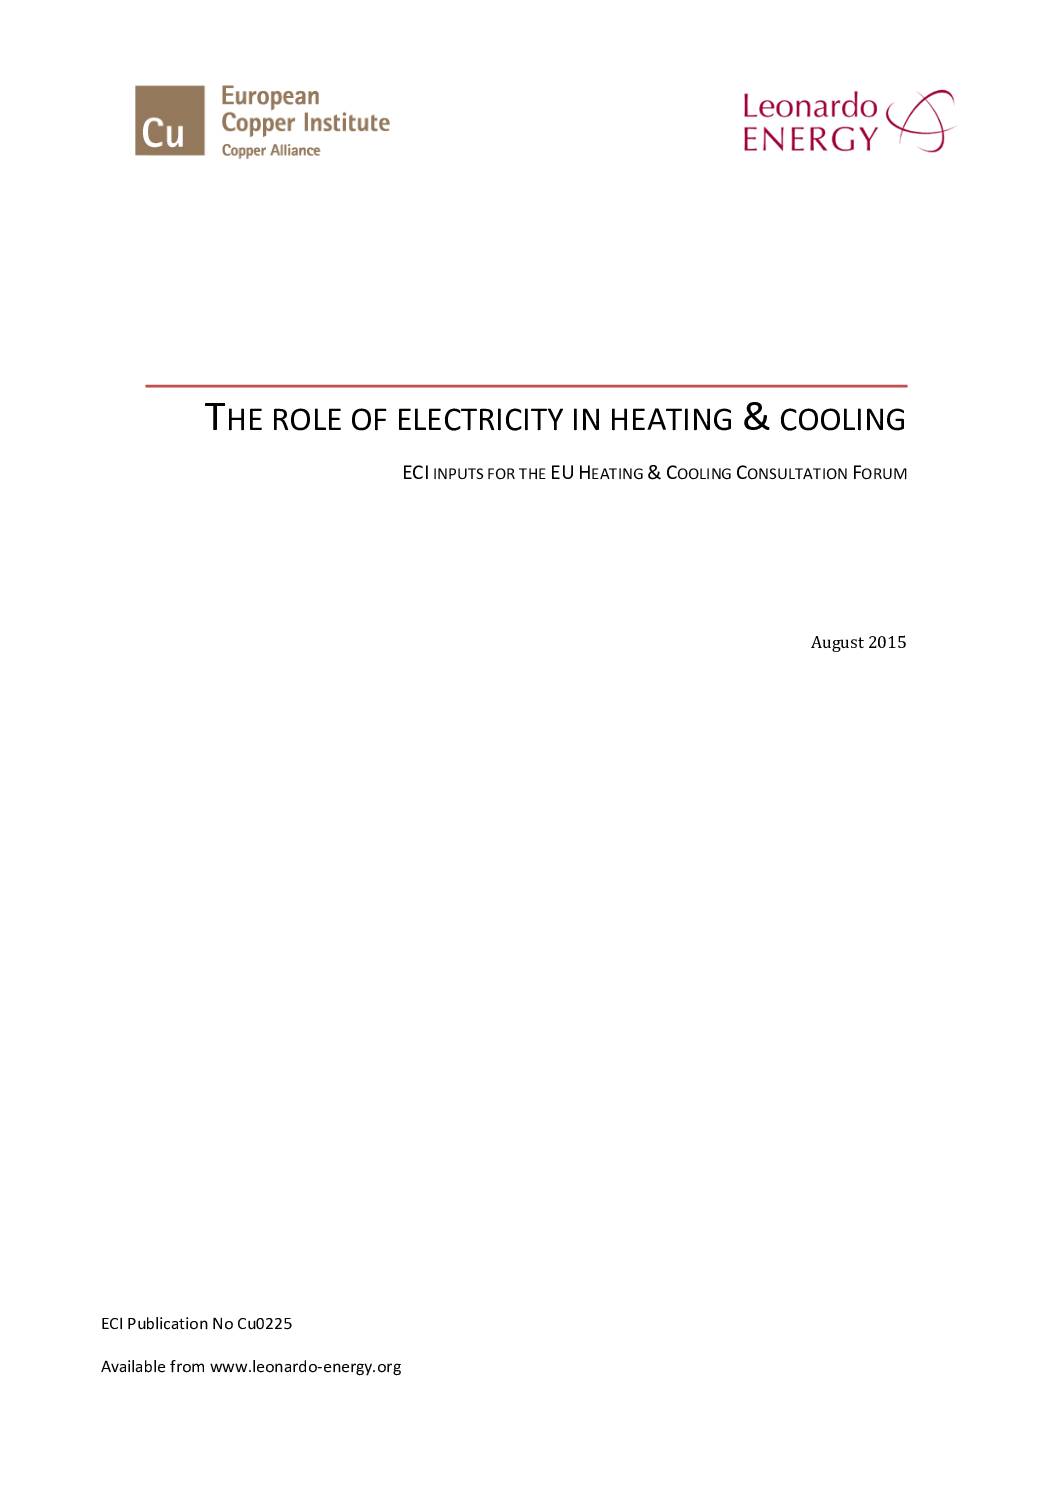 The Role of Electricity in Heating and Cooling